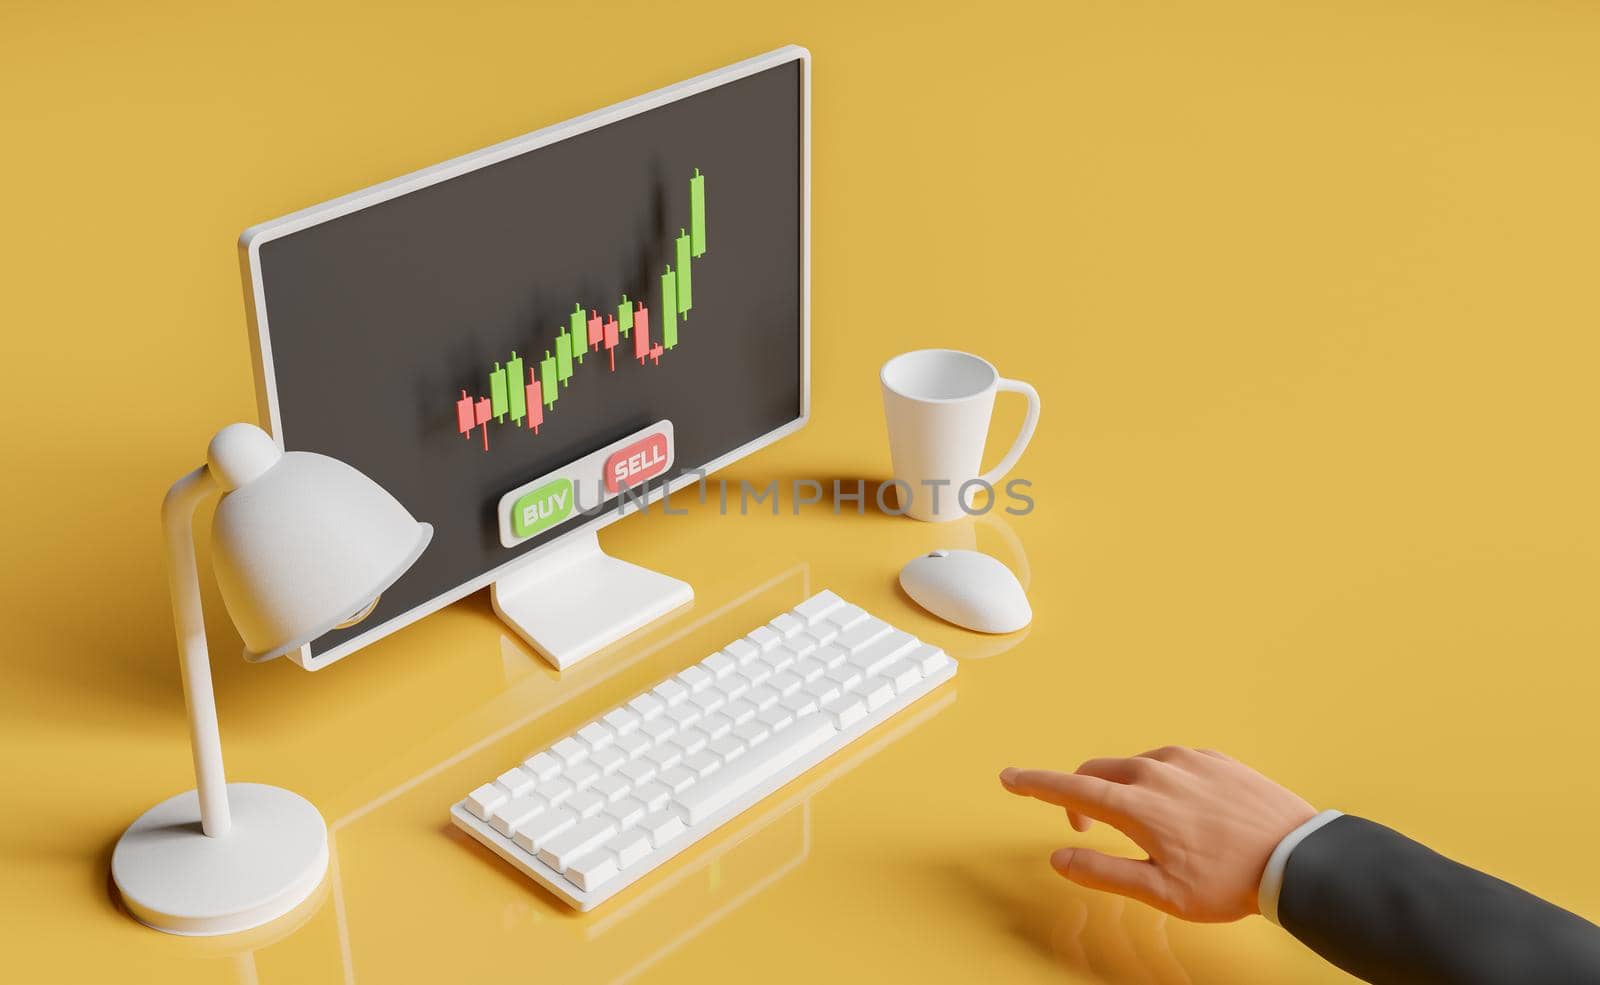 desktop computer with price chart, lamp, mug and a hand touching the keyboard. 3d rendering